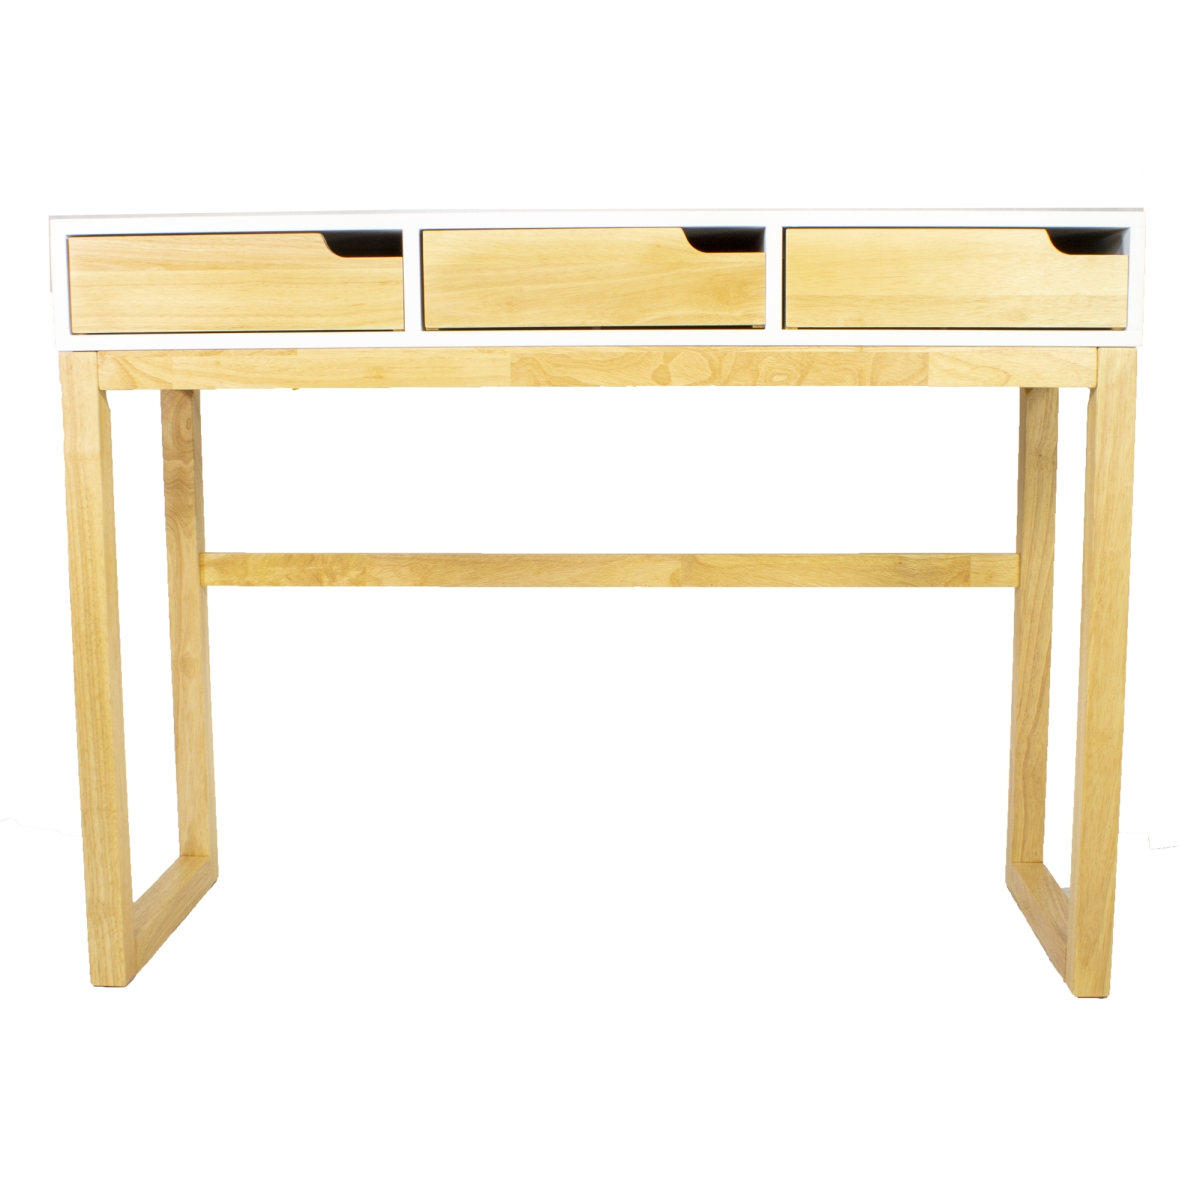 365085 White & Natural Solid Wood Three Drawer Console Table, 43 X 16 X 32 In.